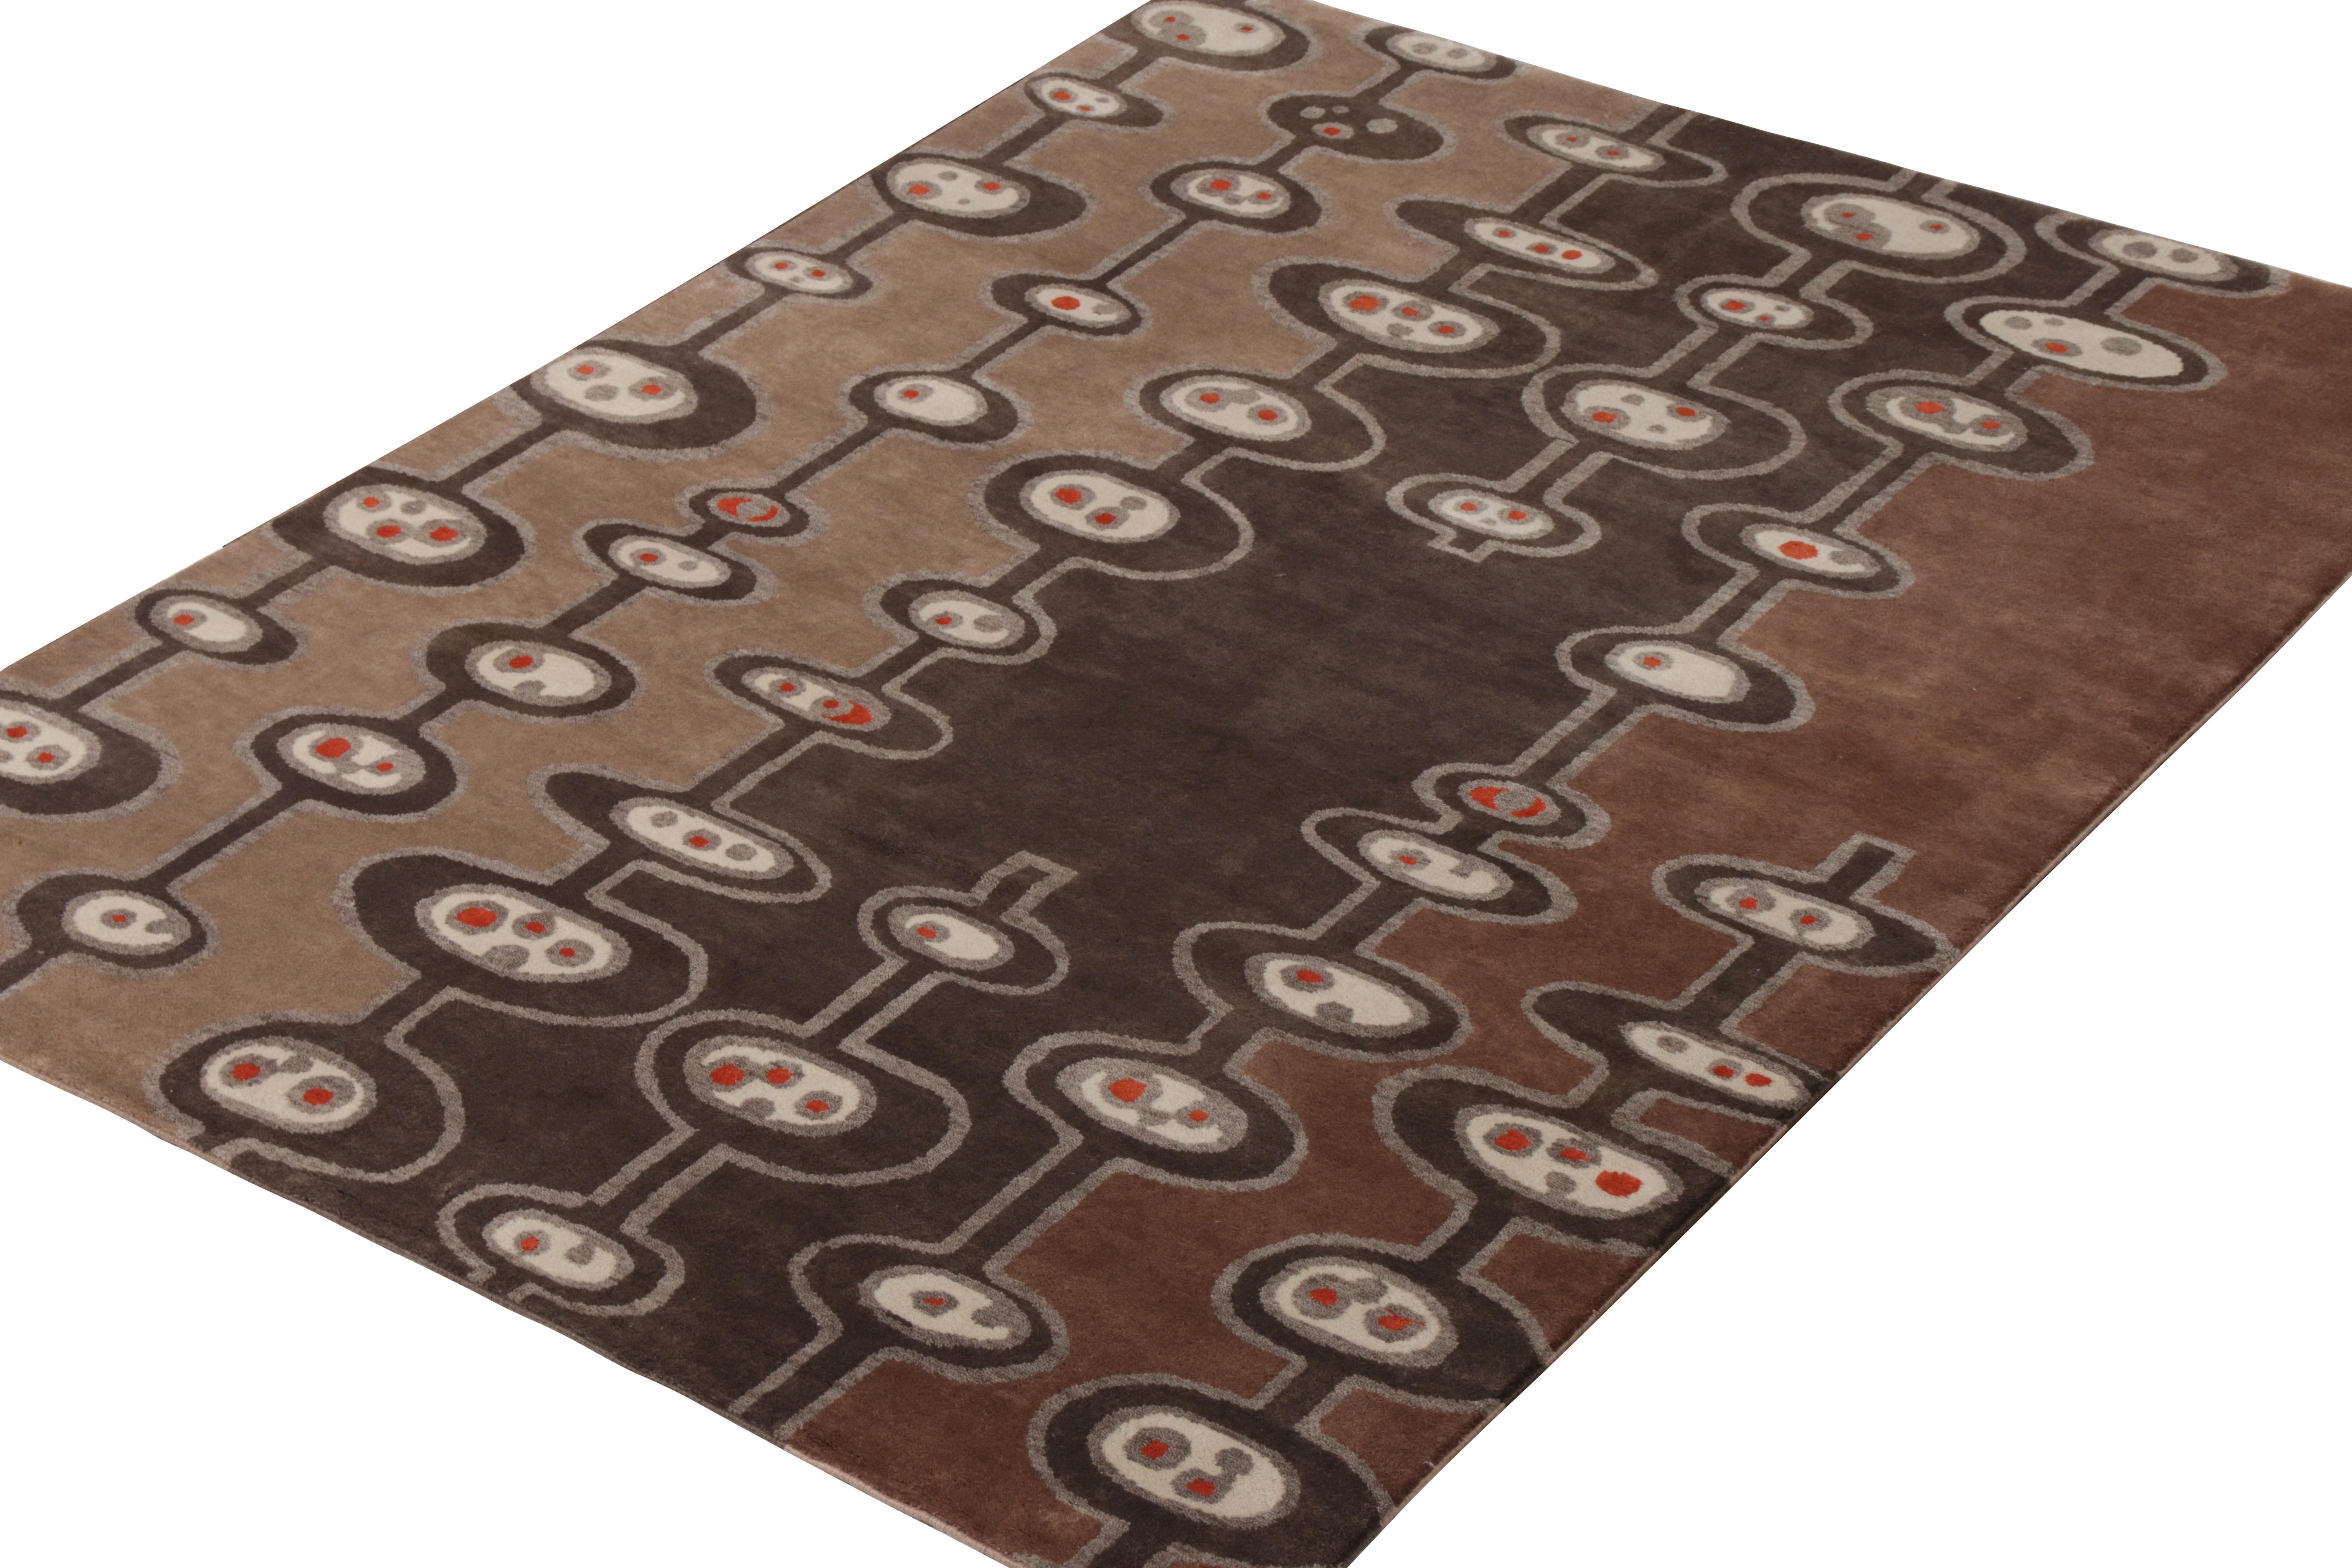 Hand knotted in a unique blend of wool and silk, this 6 x 8 rug joins Rug & Kilim’s Mid-Century Modern rug collection—reimaging atomic age style patterns in the most luxurious quality of scale, graph, refined texture, and color like that of this